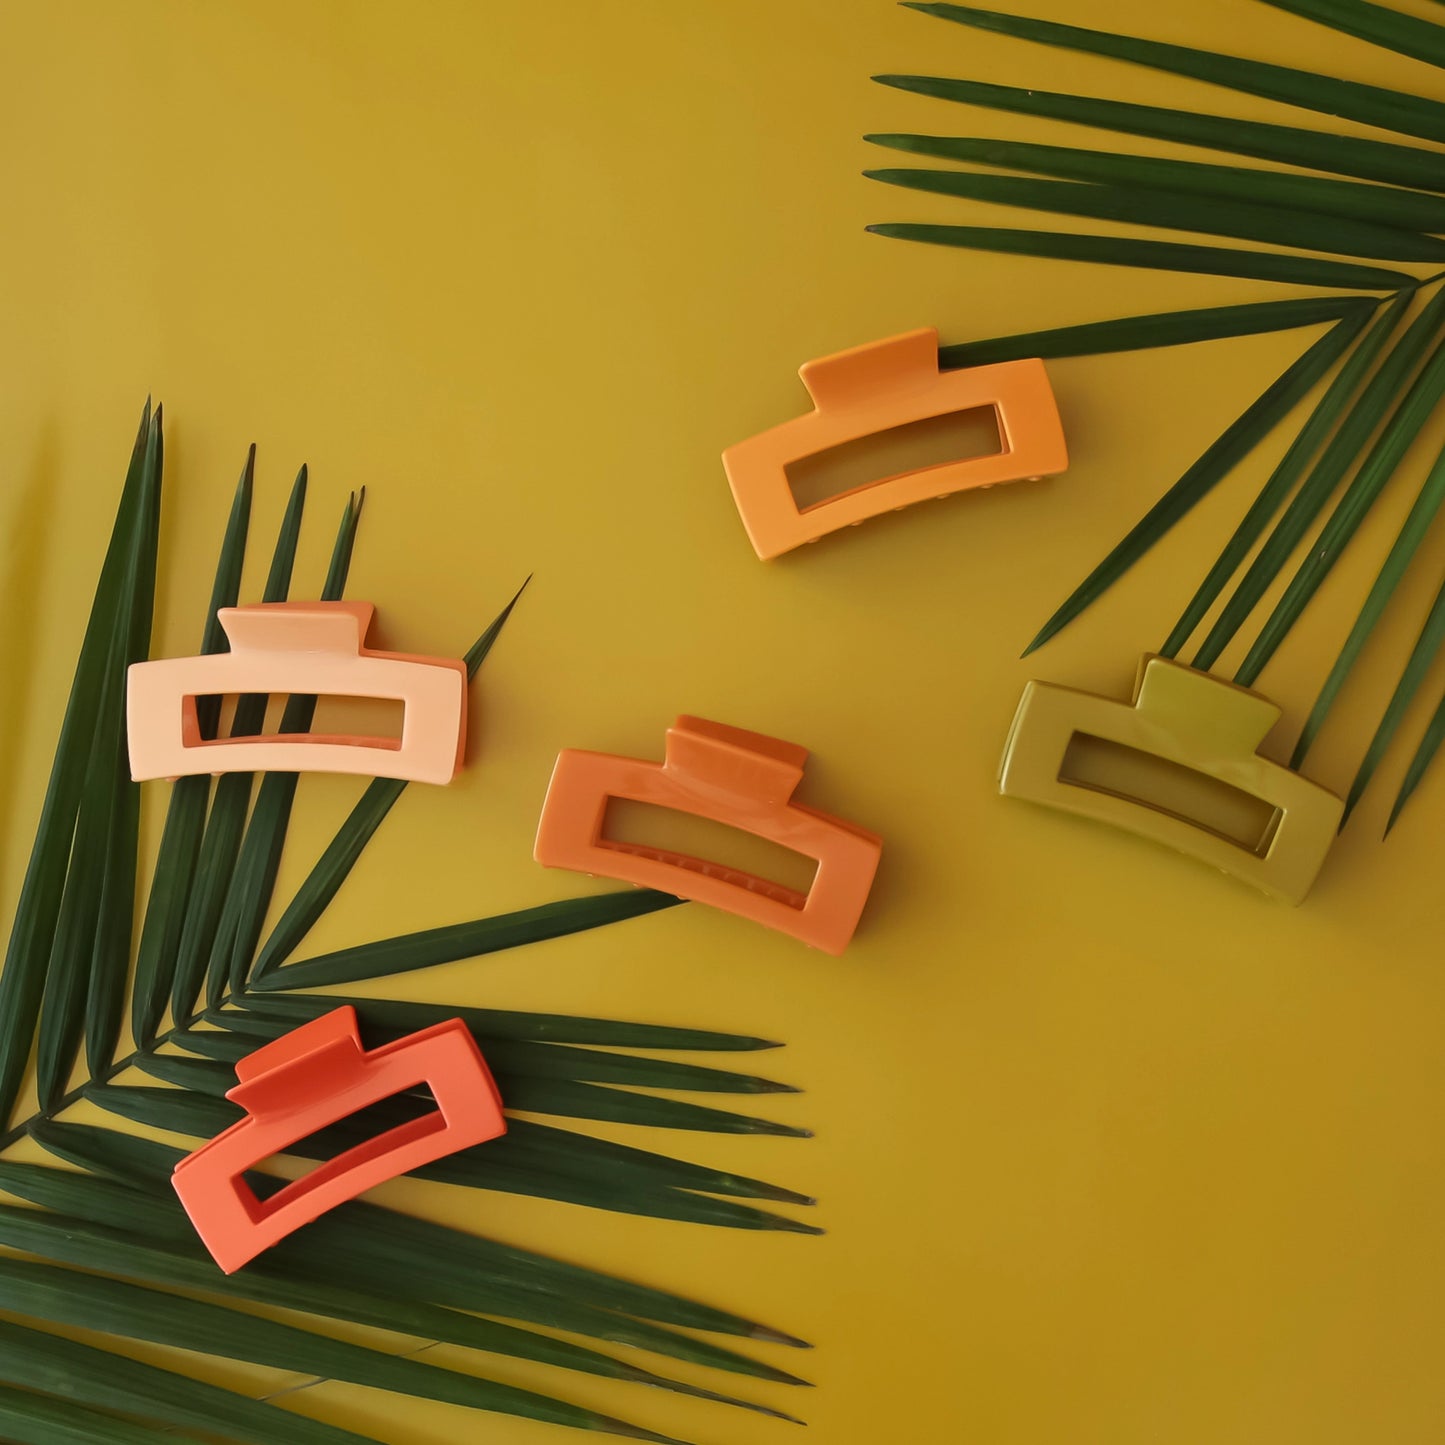 On a green background is a variety of rectangle claw clips in different colors on a green palm leaf.